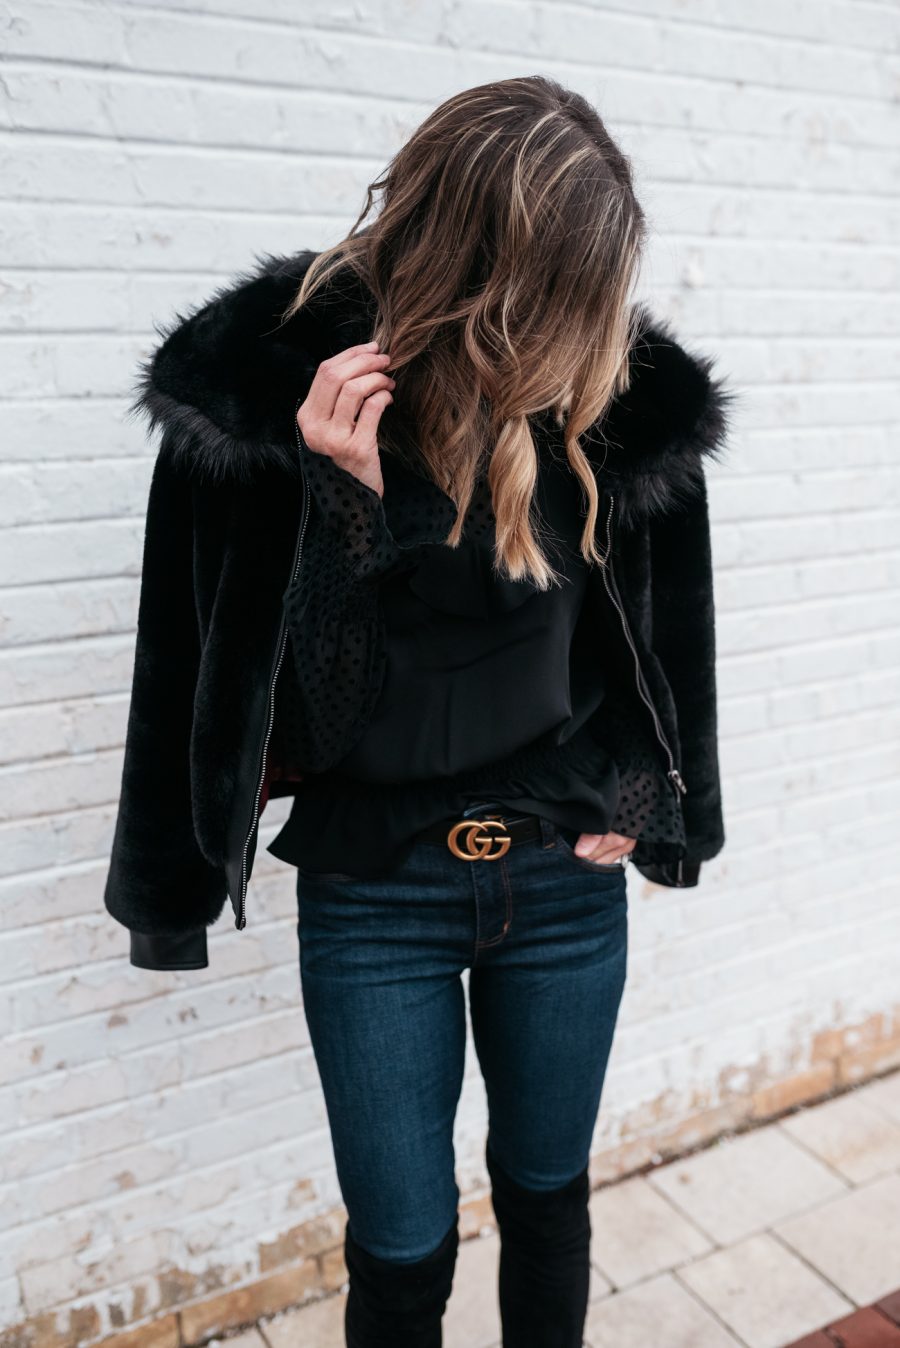 Suzanne wearing a black blouse, faux fur jacket, denim, belt and over the knee boots